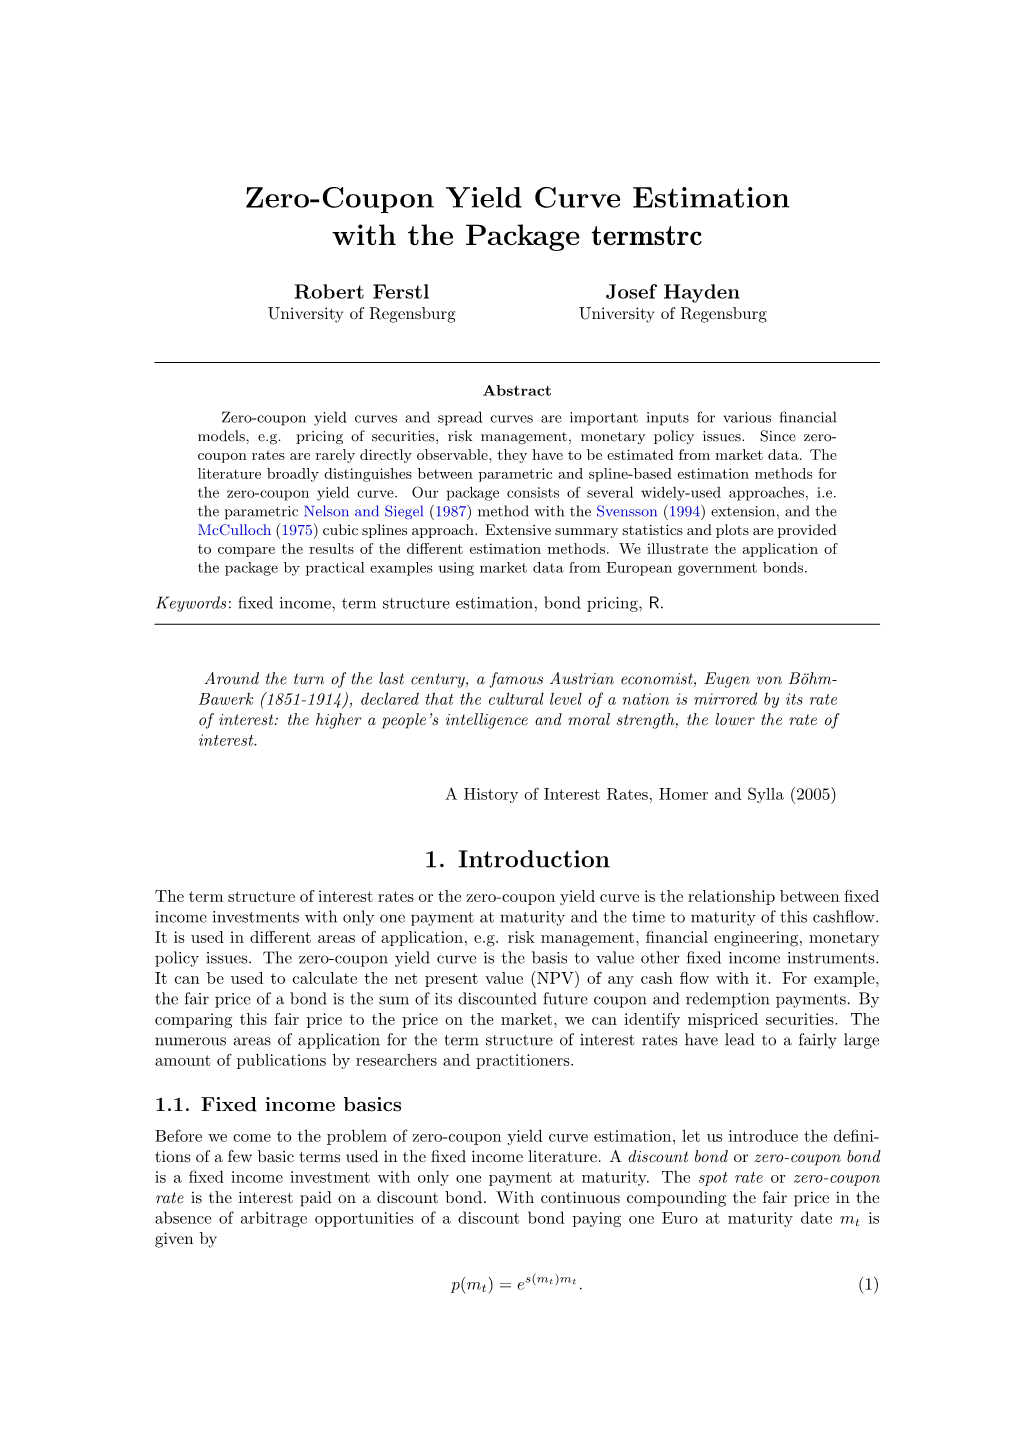 Zero-Coupon Yield Curve Estimation with the Package Termstrc